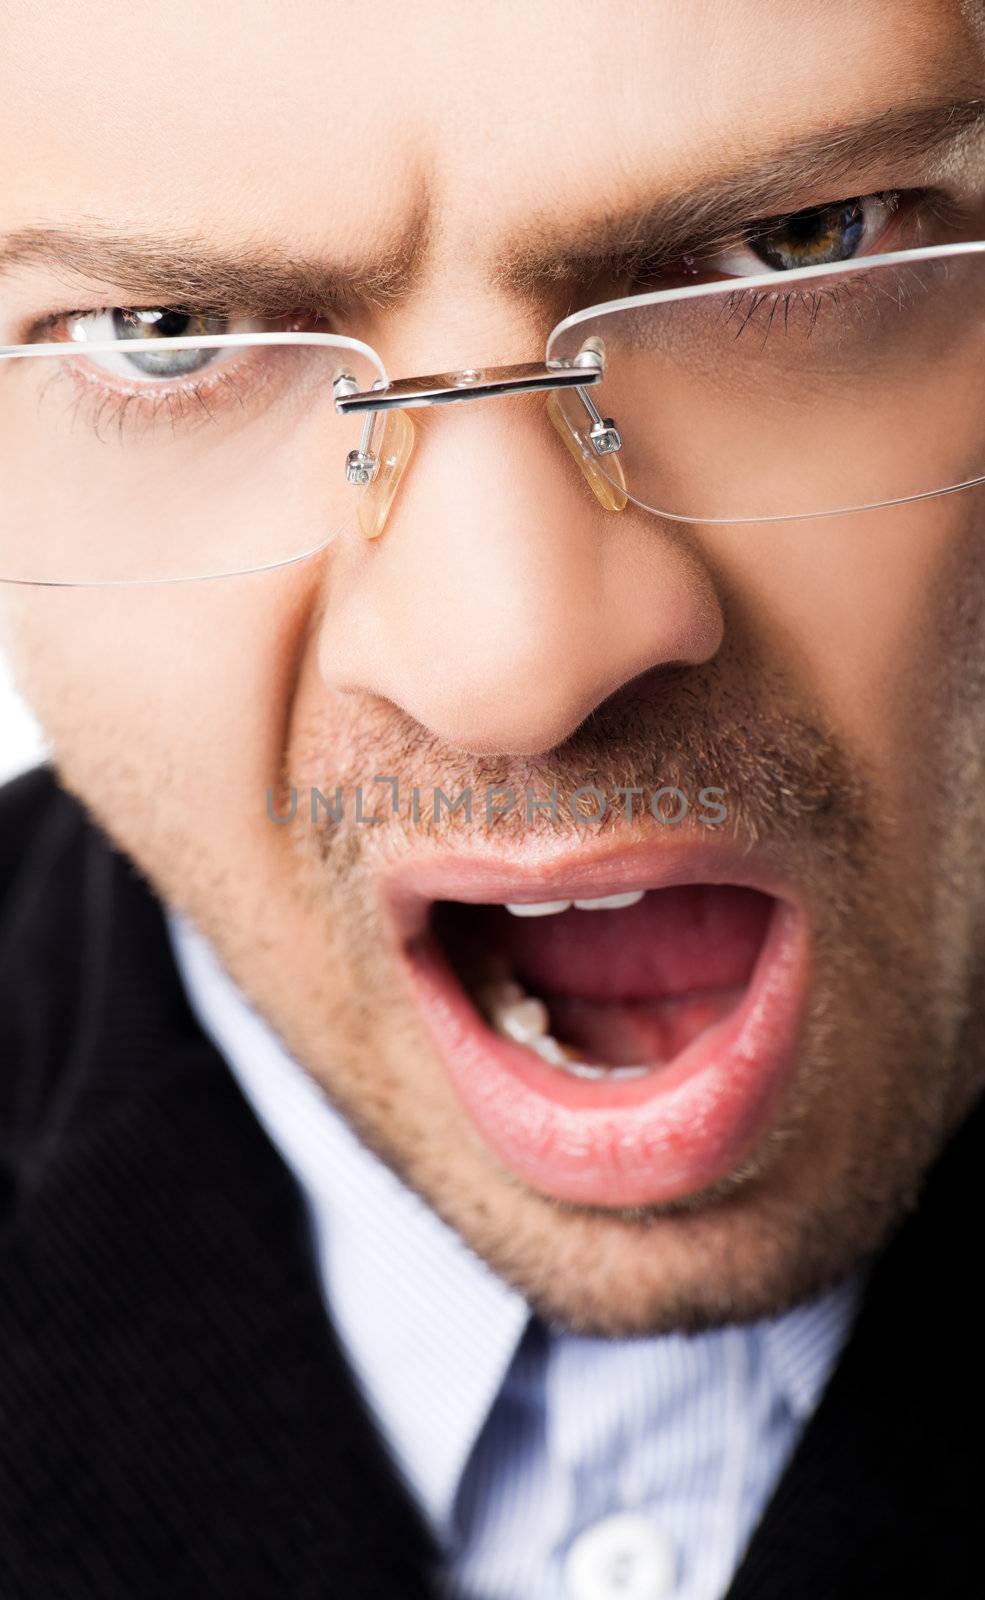 Close-up of angry young man with glasses and open mouth